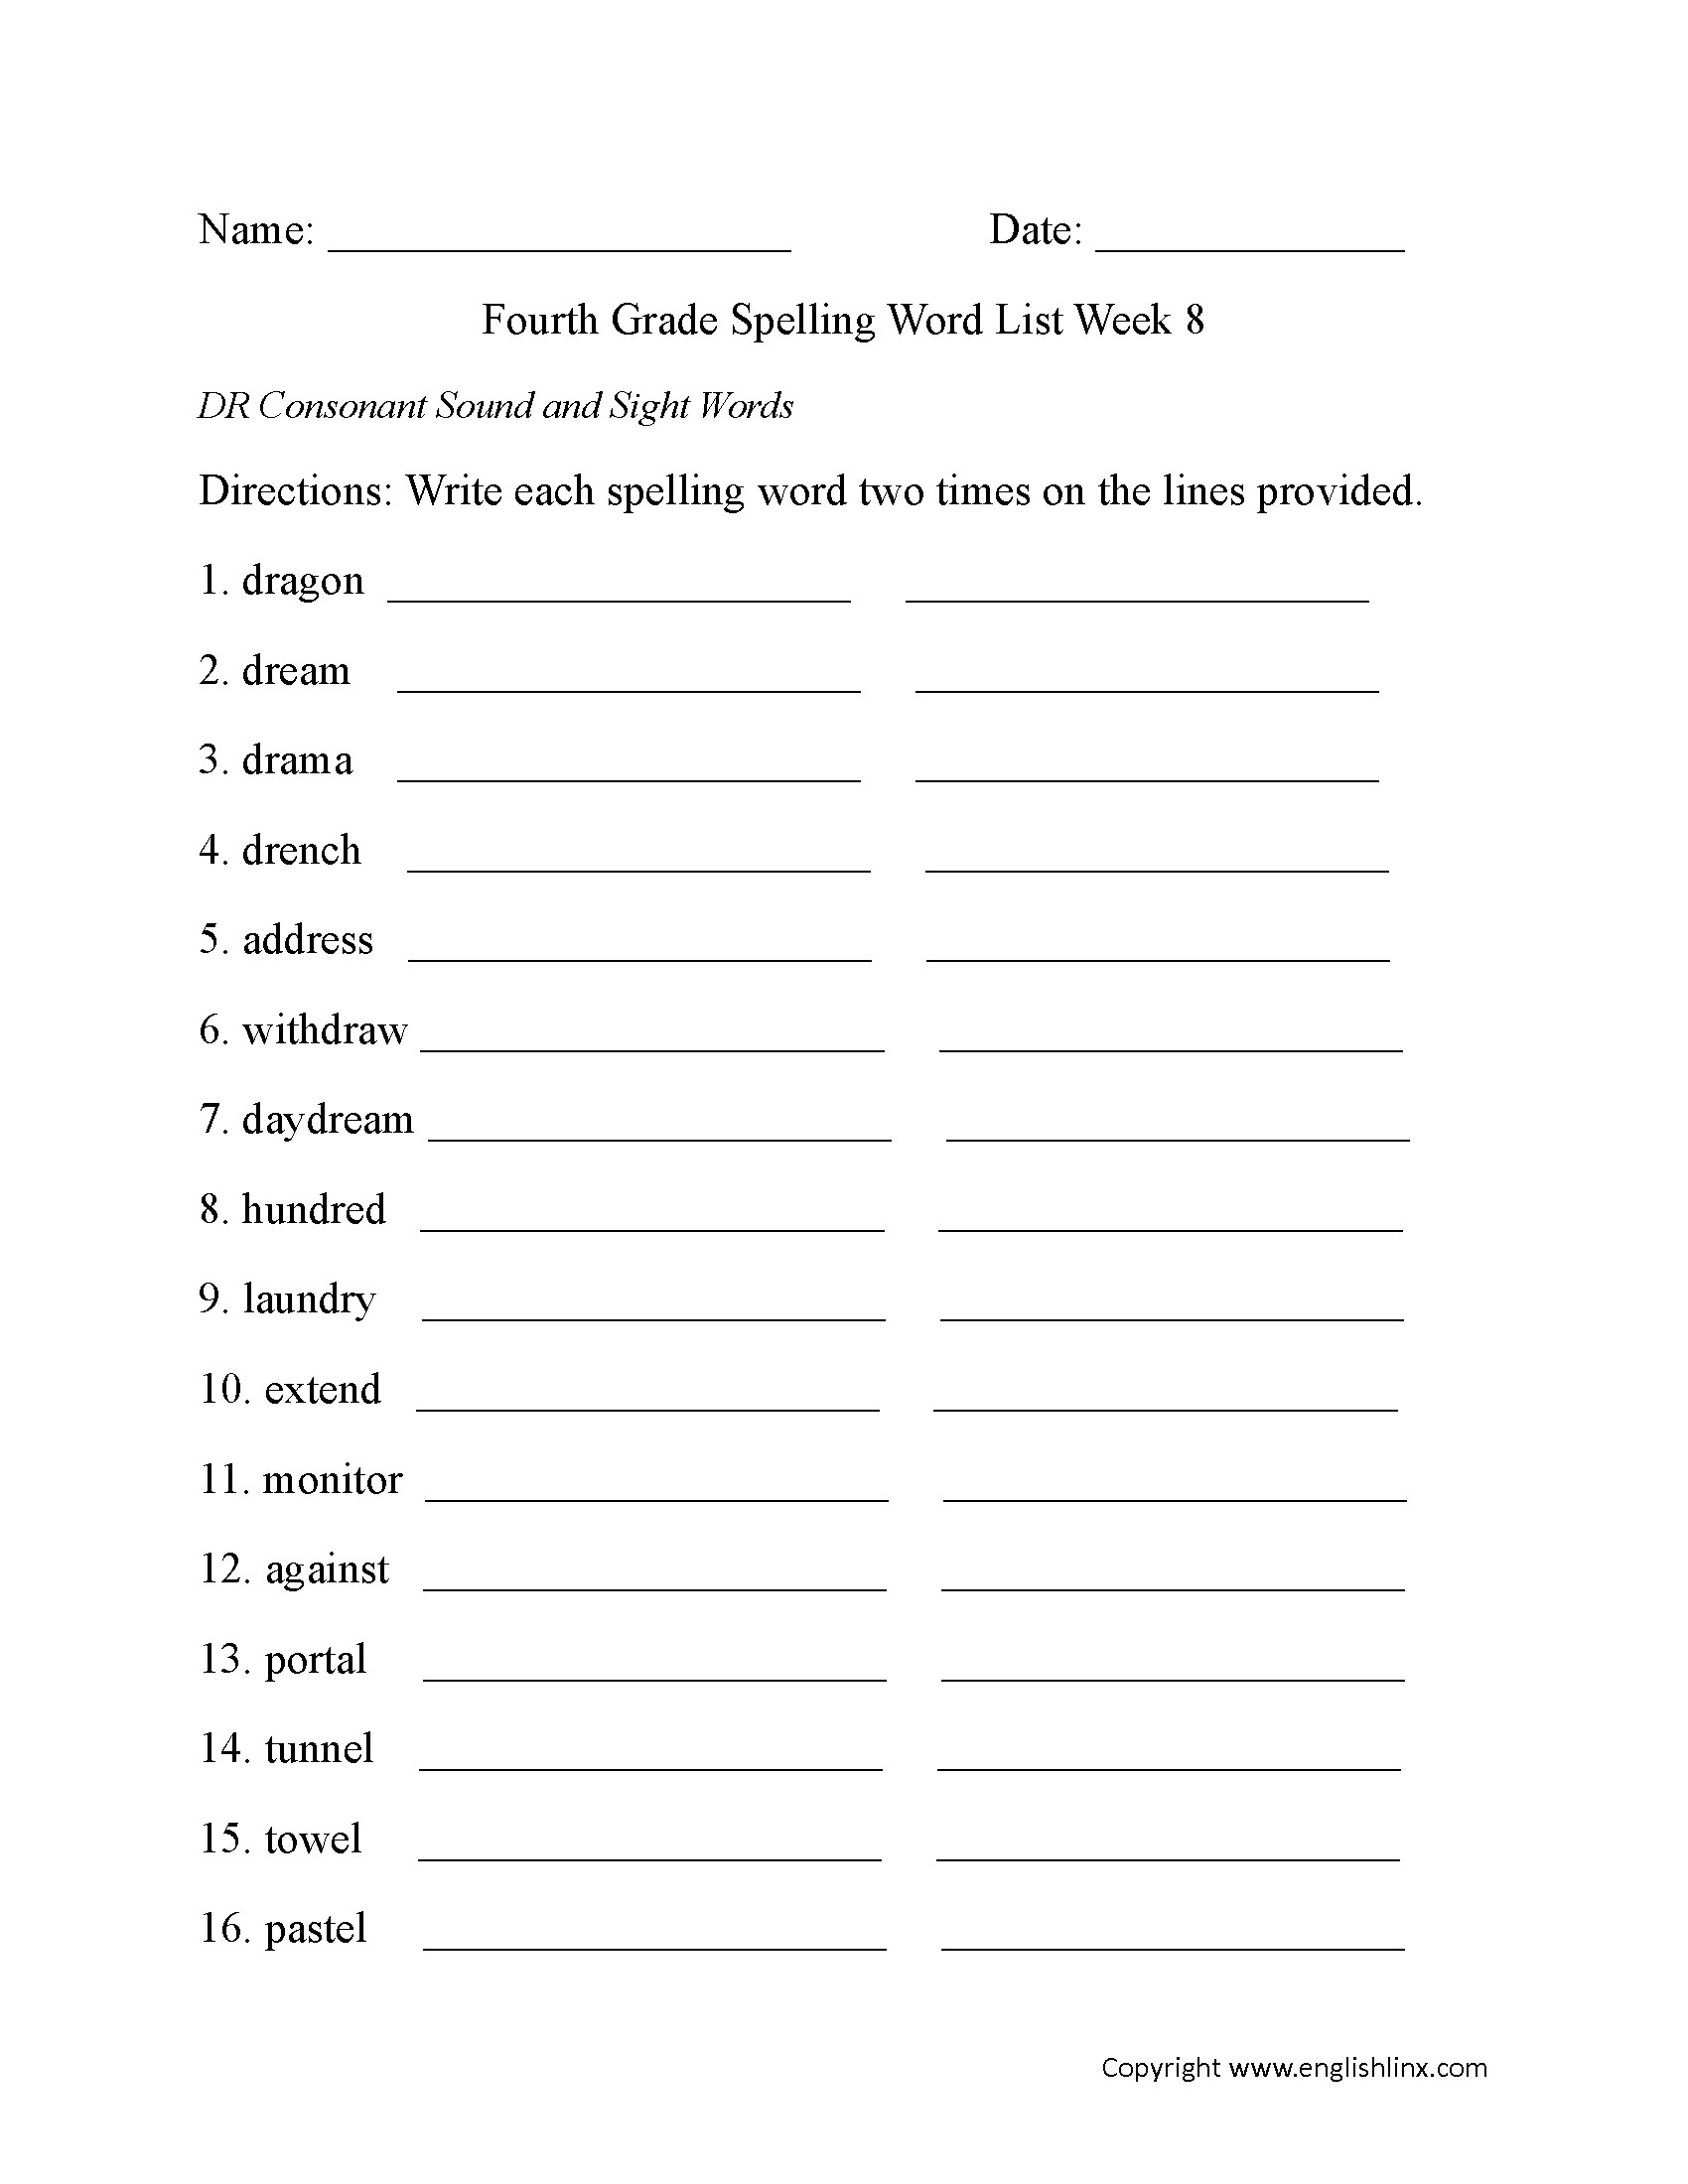 Week 8 DR Consonant and Sight Words Fourth Grade Spelling Words Worksheets